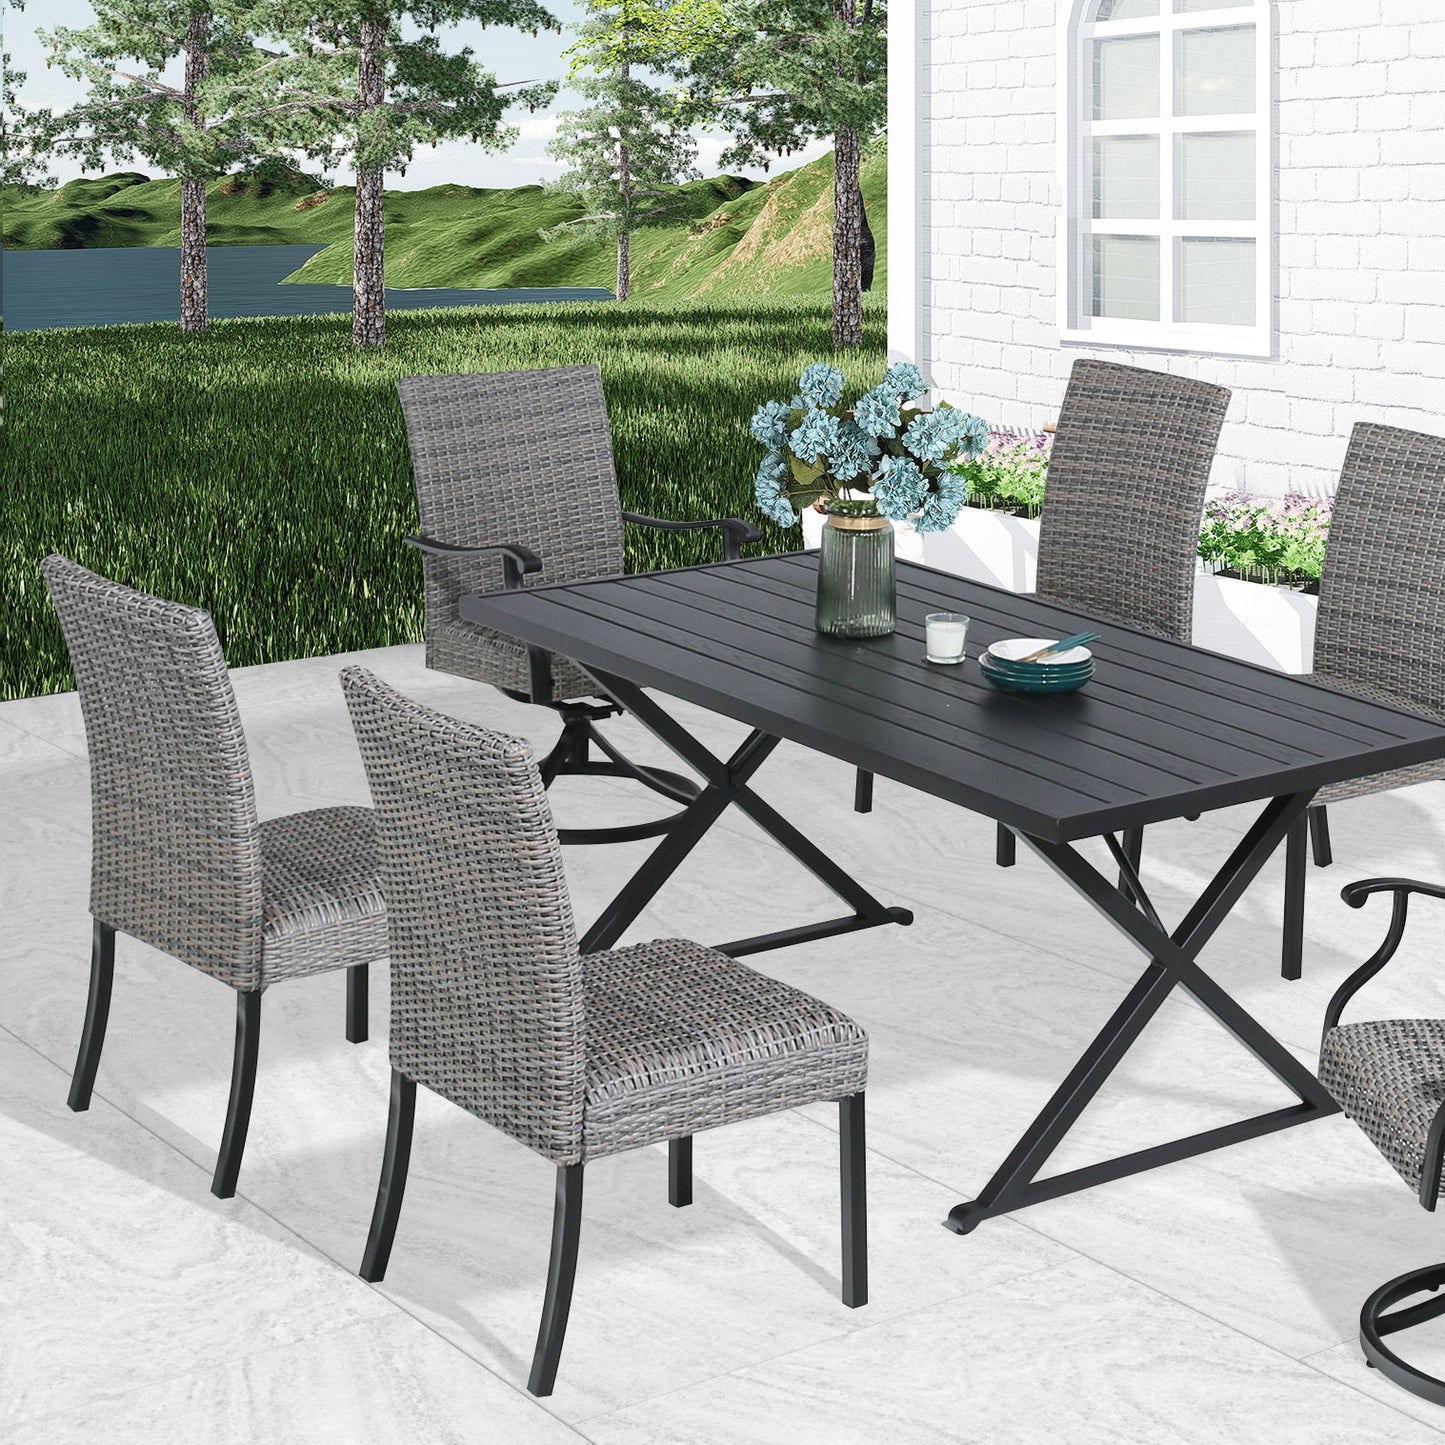 Patio Wicker Dining Chairs Outdoor Heavy-Duty Steel Frame Rattan Chairs with Quick Dry Foam, Set of 4